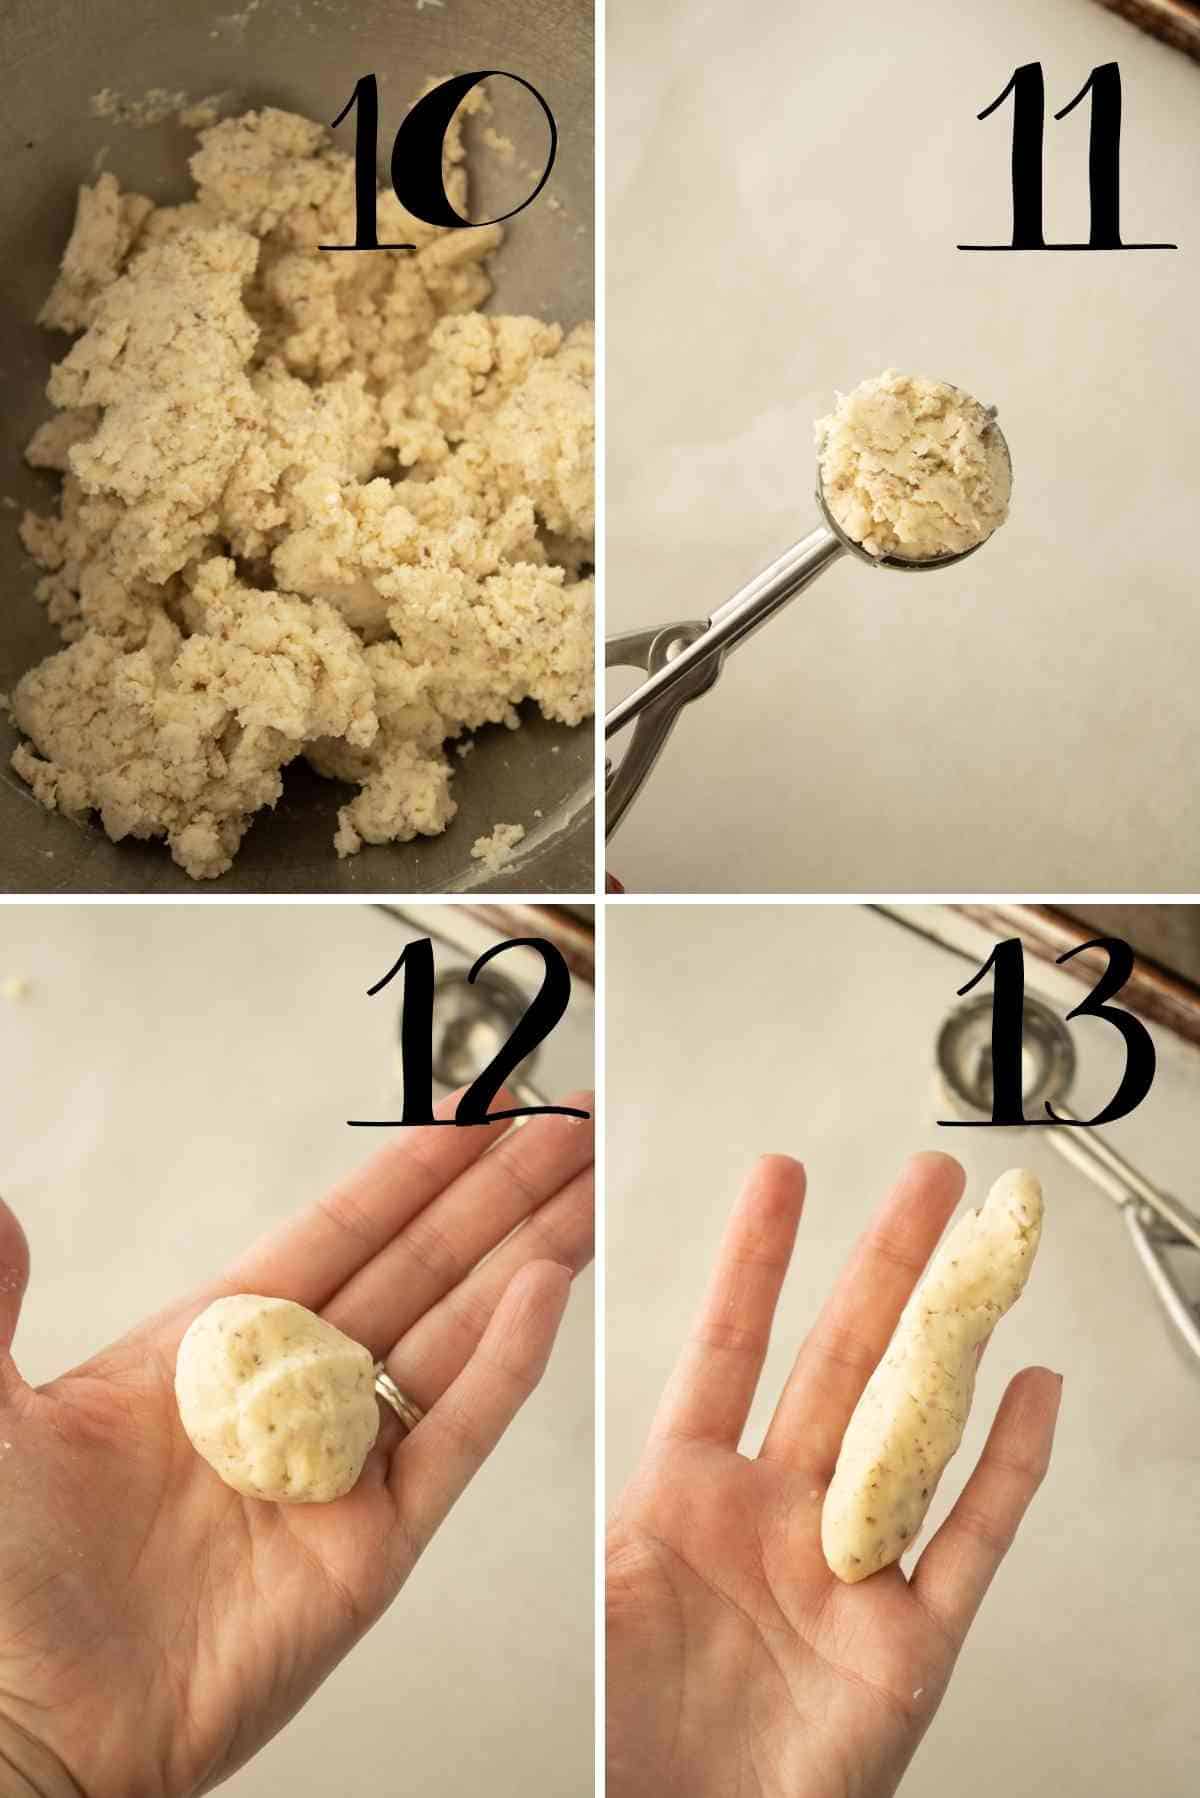 Measure out and shape the dough into long creepy fingers.